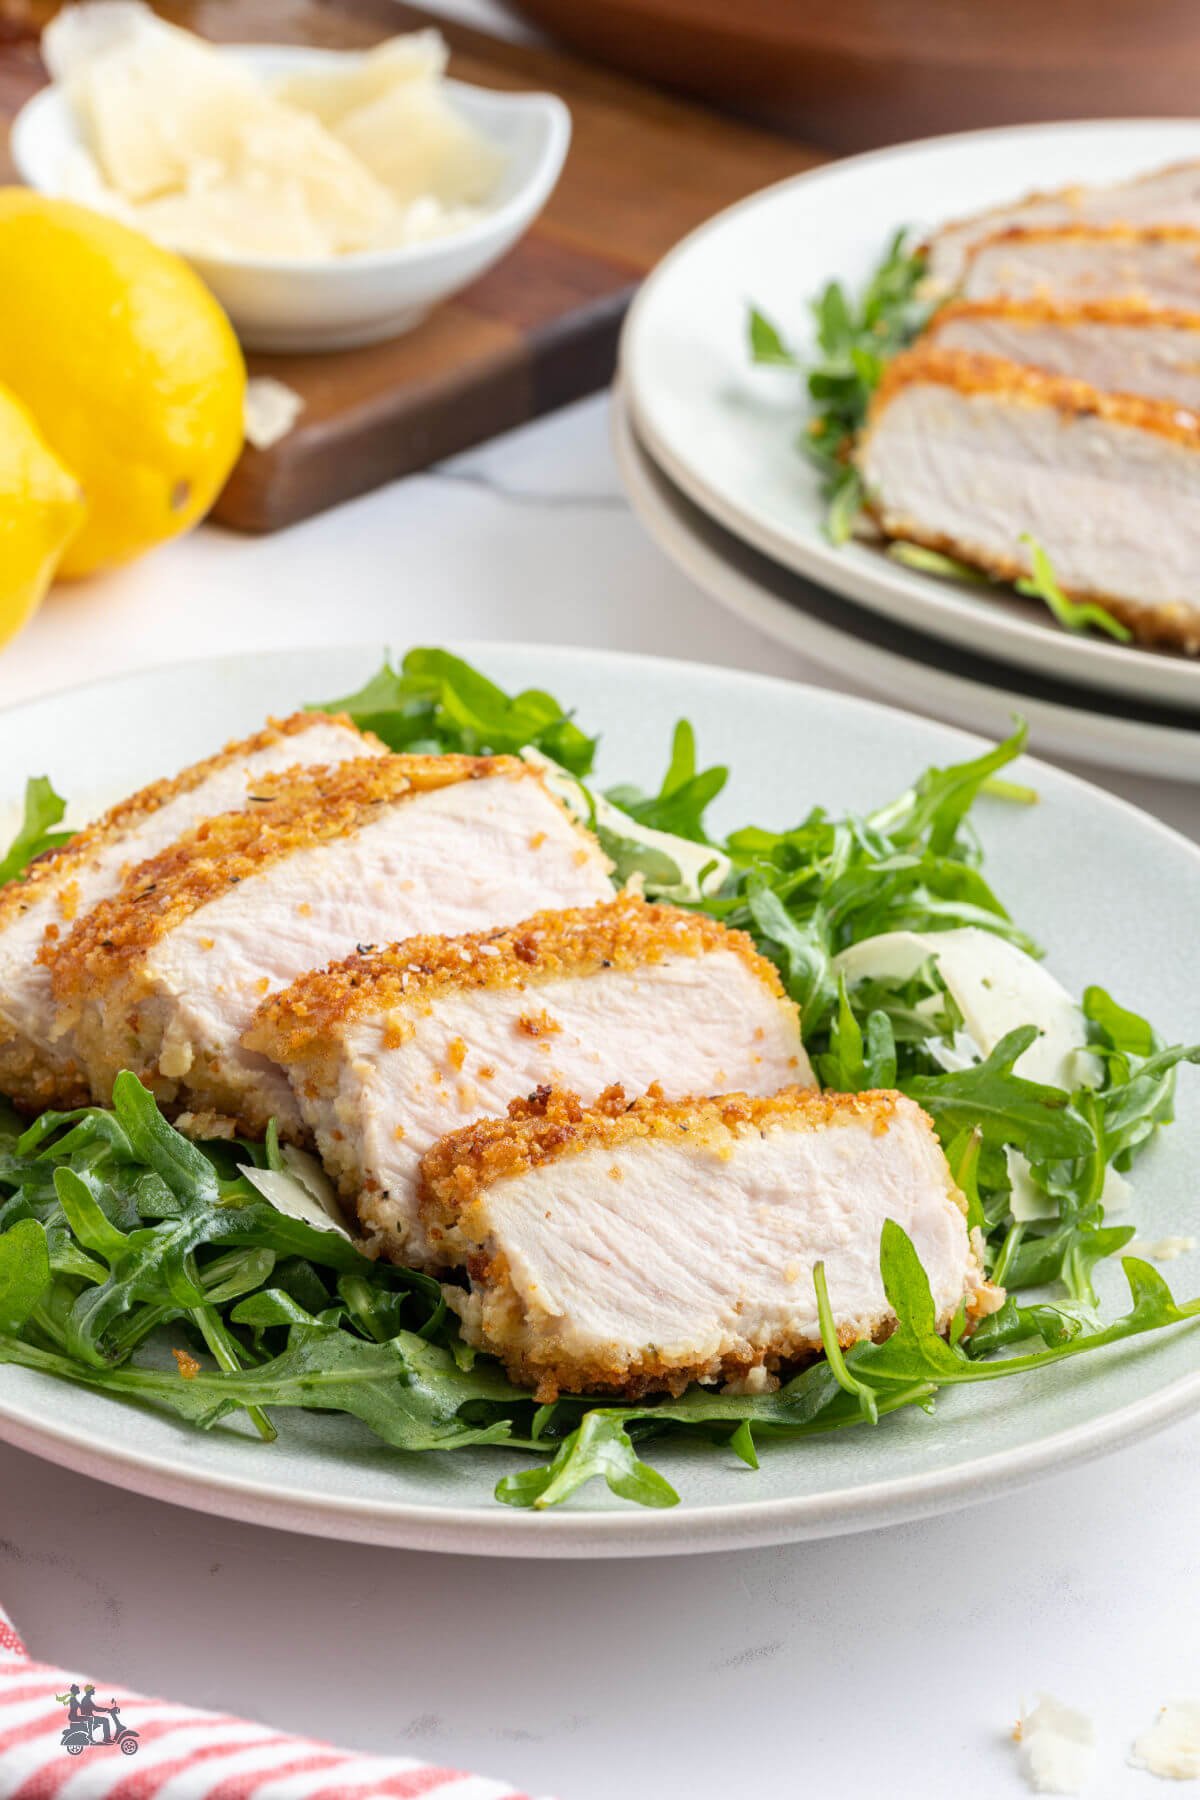 Pork loin chops coated with panko crumbs and fried over a bed of arugula tossed with a lemon vinaigrette. 